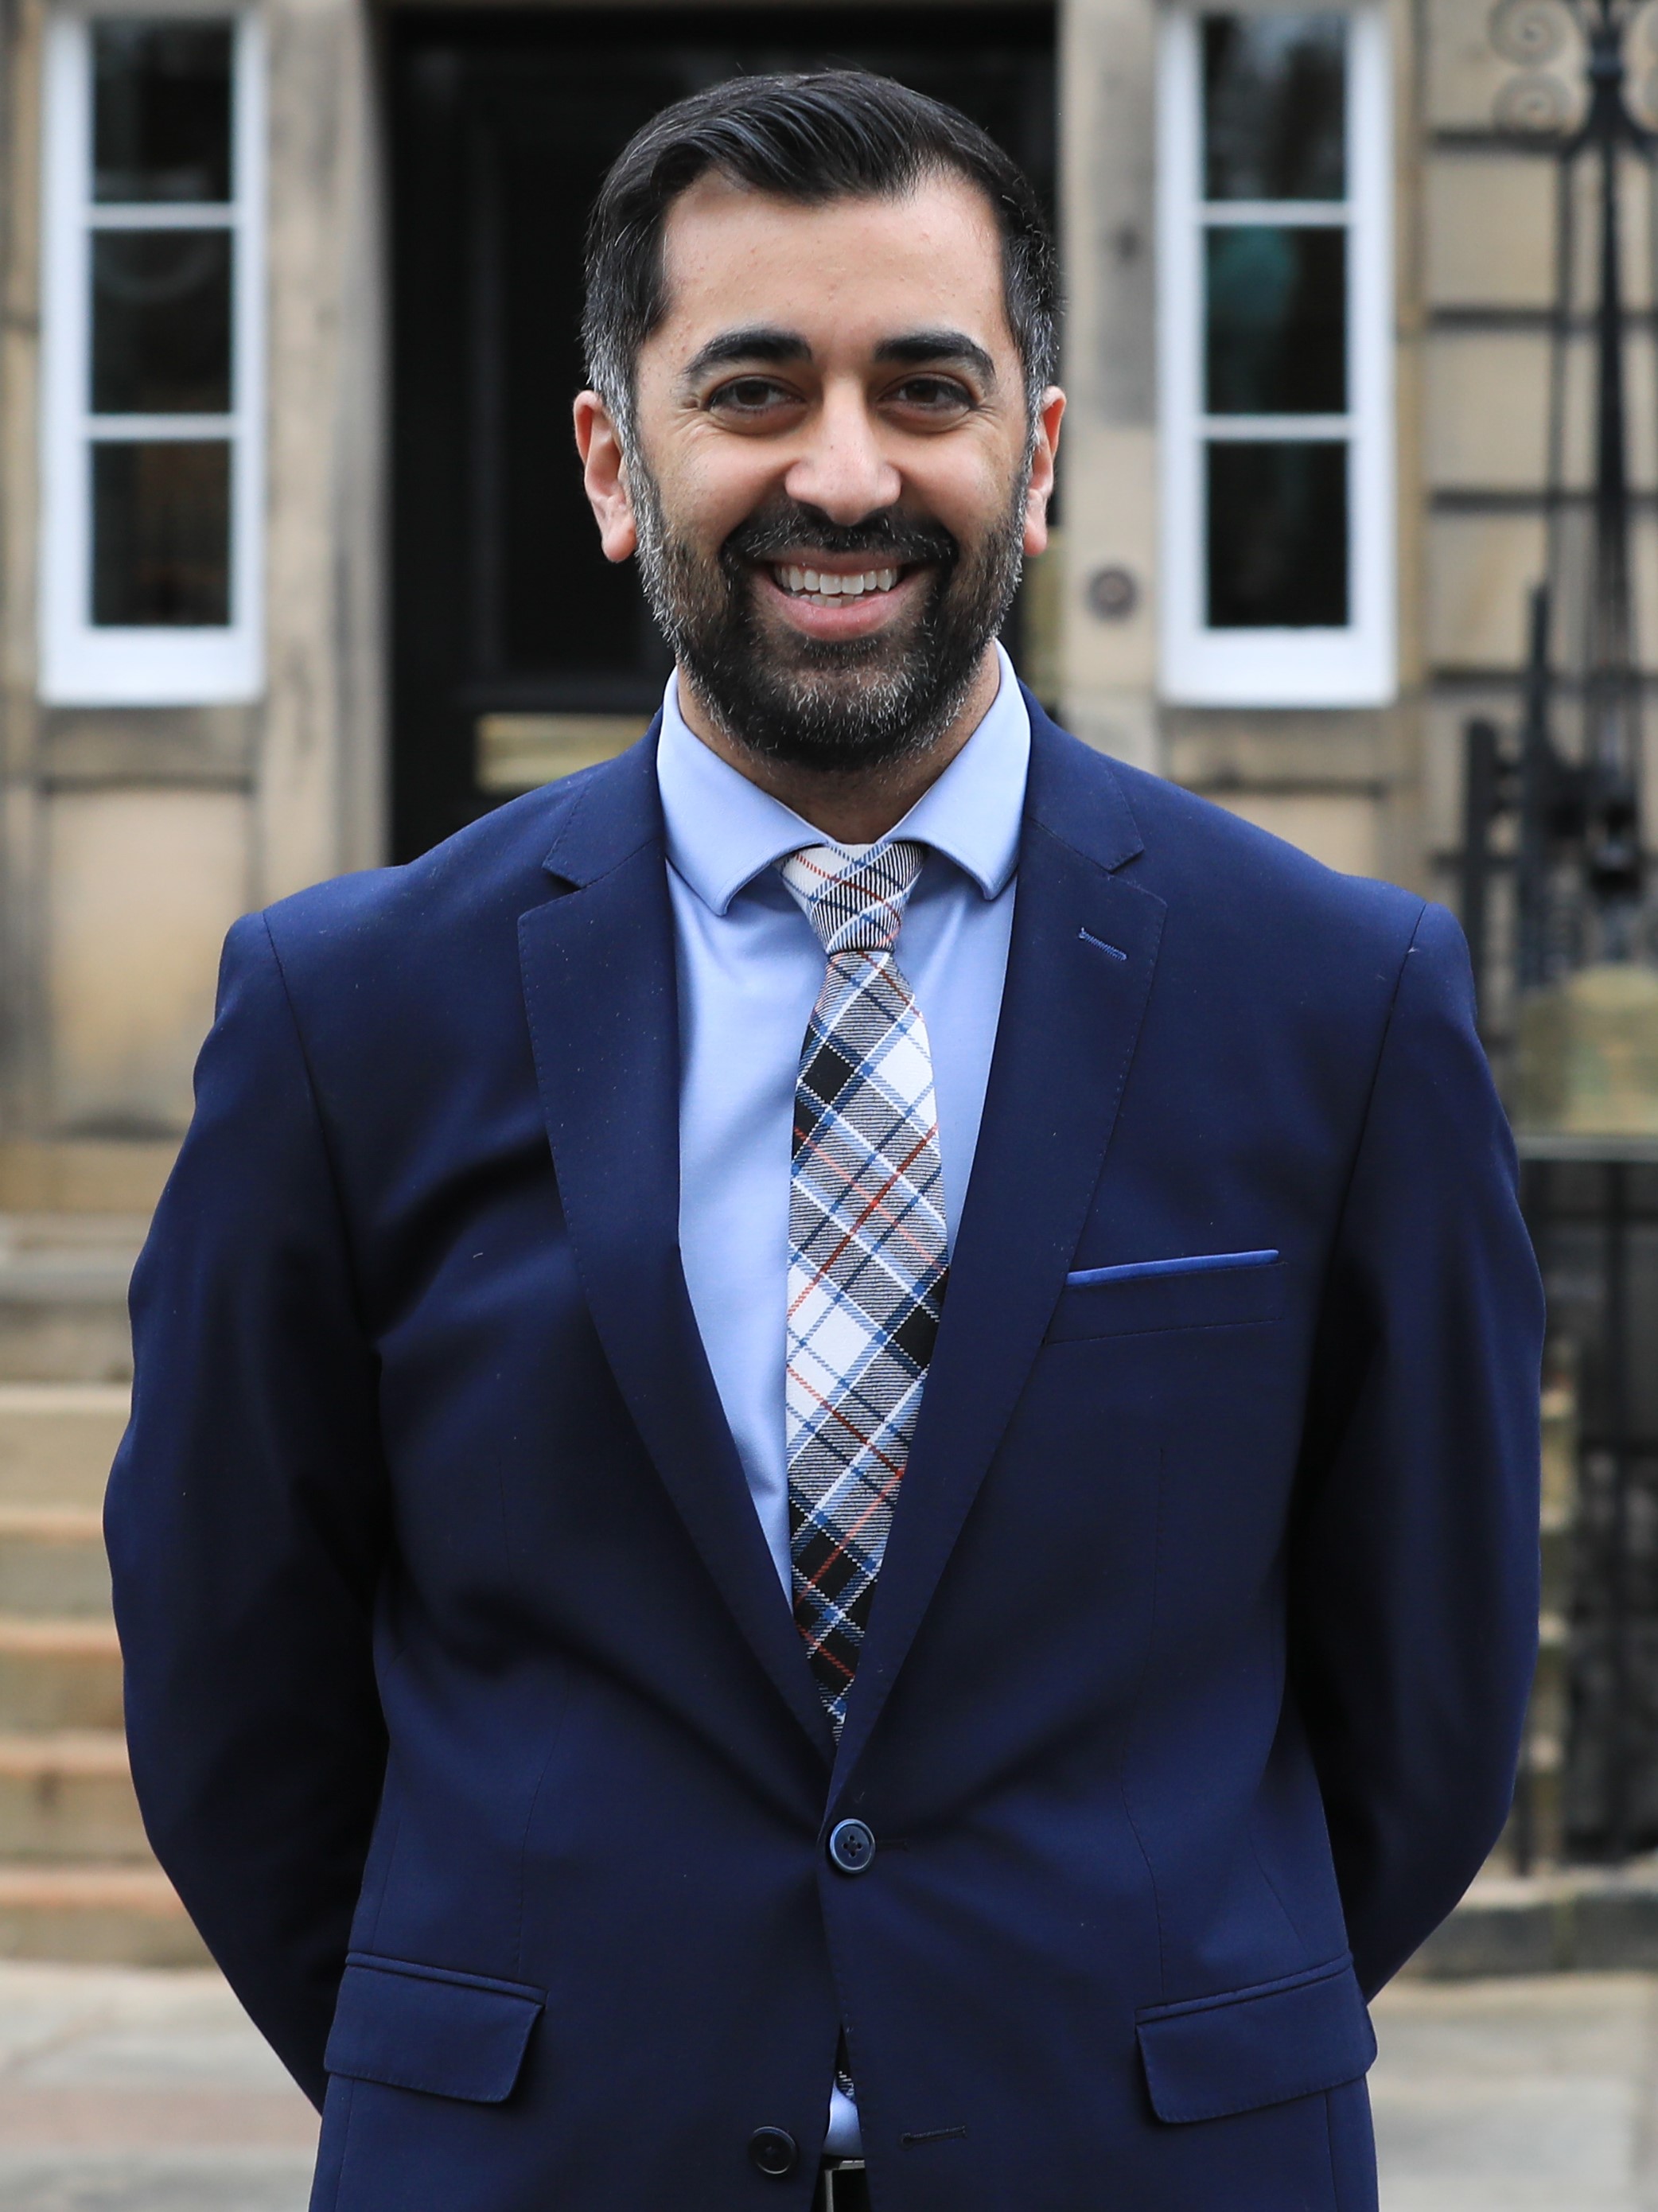 Humza Yousaf Latest South Asian To Take Over Power Reign In Queen’s Britain